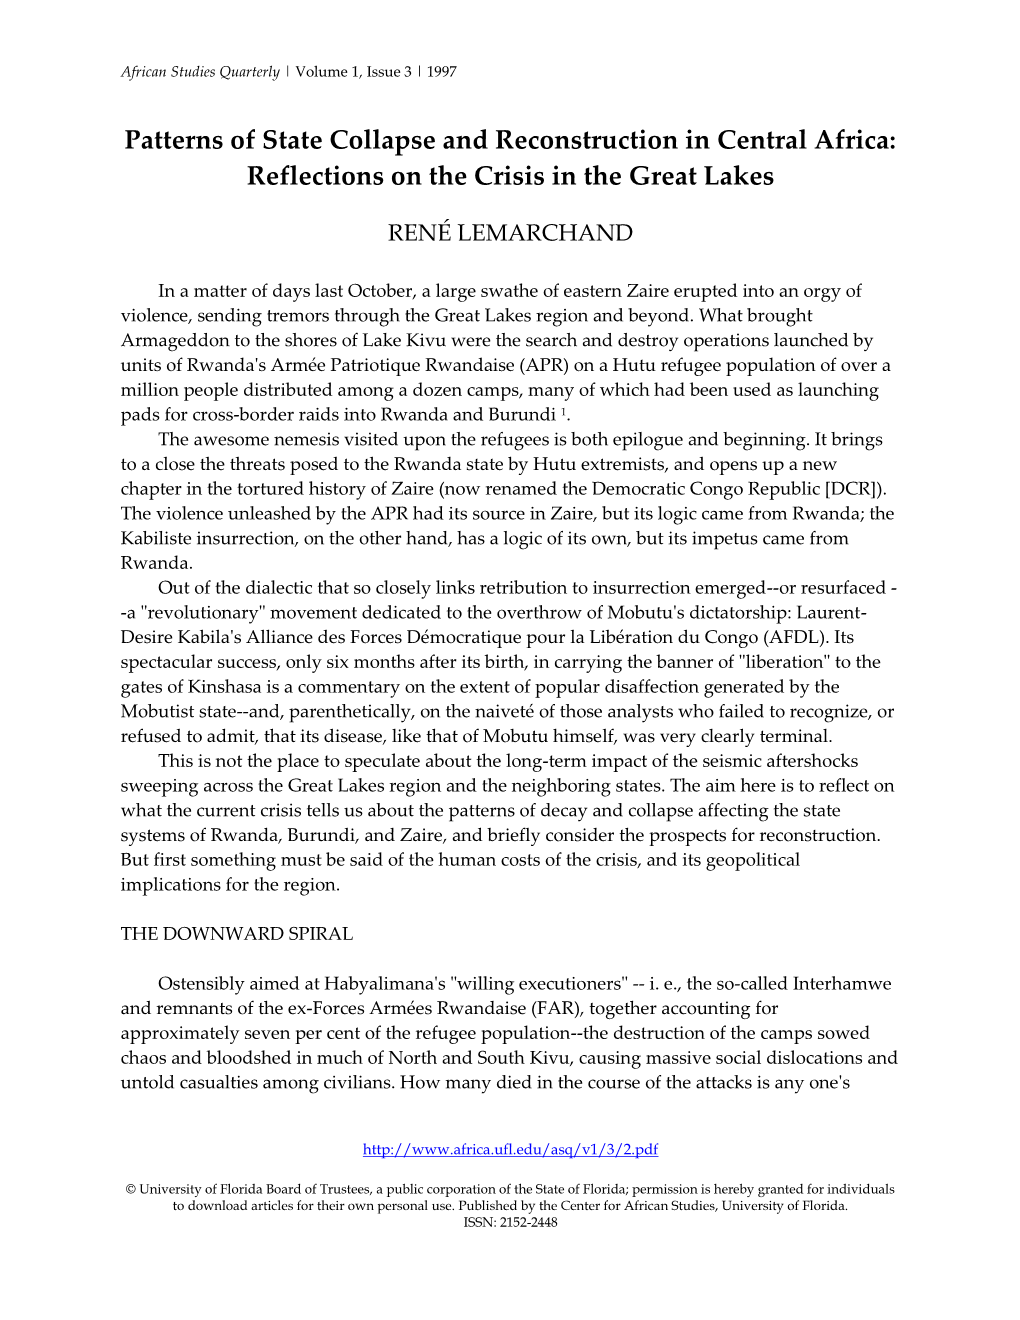 Patterns of State Collapse and Reconstruction in Central Africa: Reflections on the Crisis in the Great Lakes